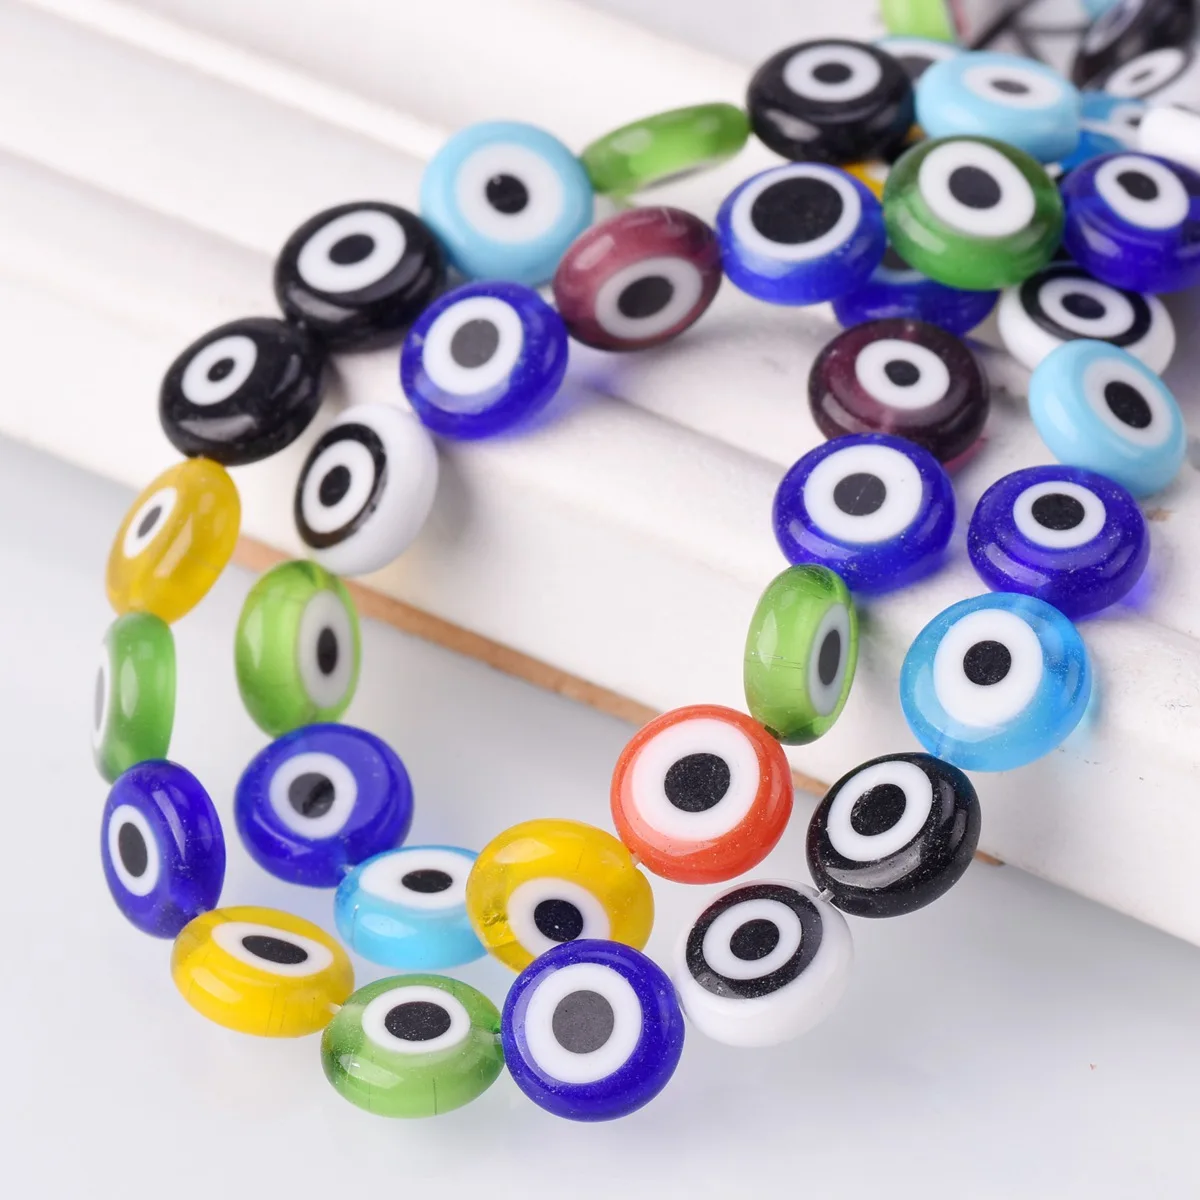 6mm 8mm 10mm 12mm Mixed Flat Round Evil Eye Millefiori Lampwork Glass Beads For Jewelry Making DIY Crafts Findings copper flat bar plate pure 99 9% 1 5mm 2mm 3mm 4mm 5mm 8mm 10mm 12mm 15mm 20mm 30mm 60mm 70mm 100mm 200mm